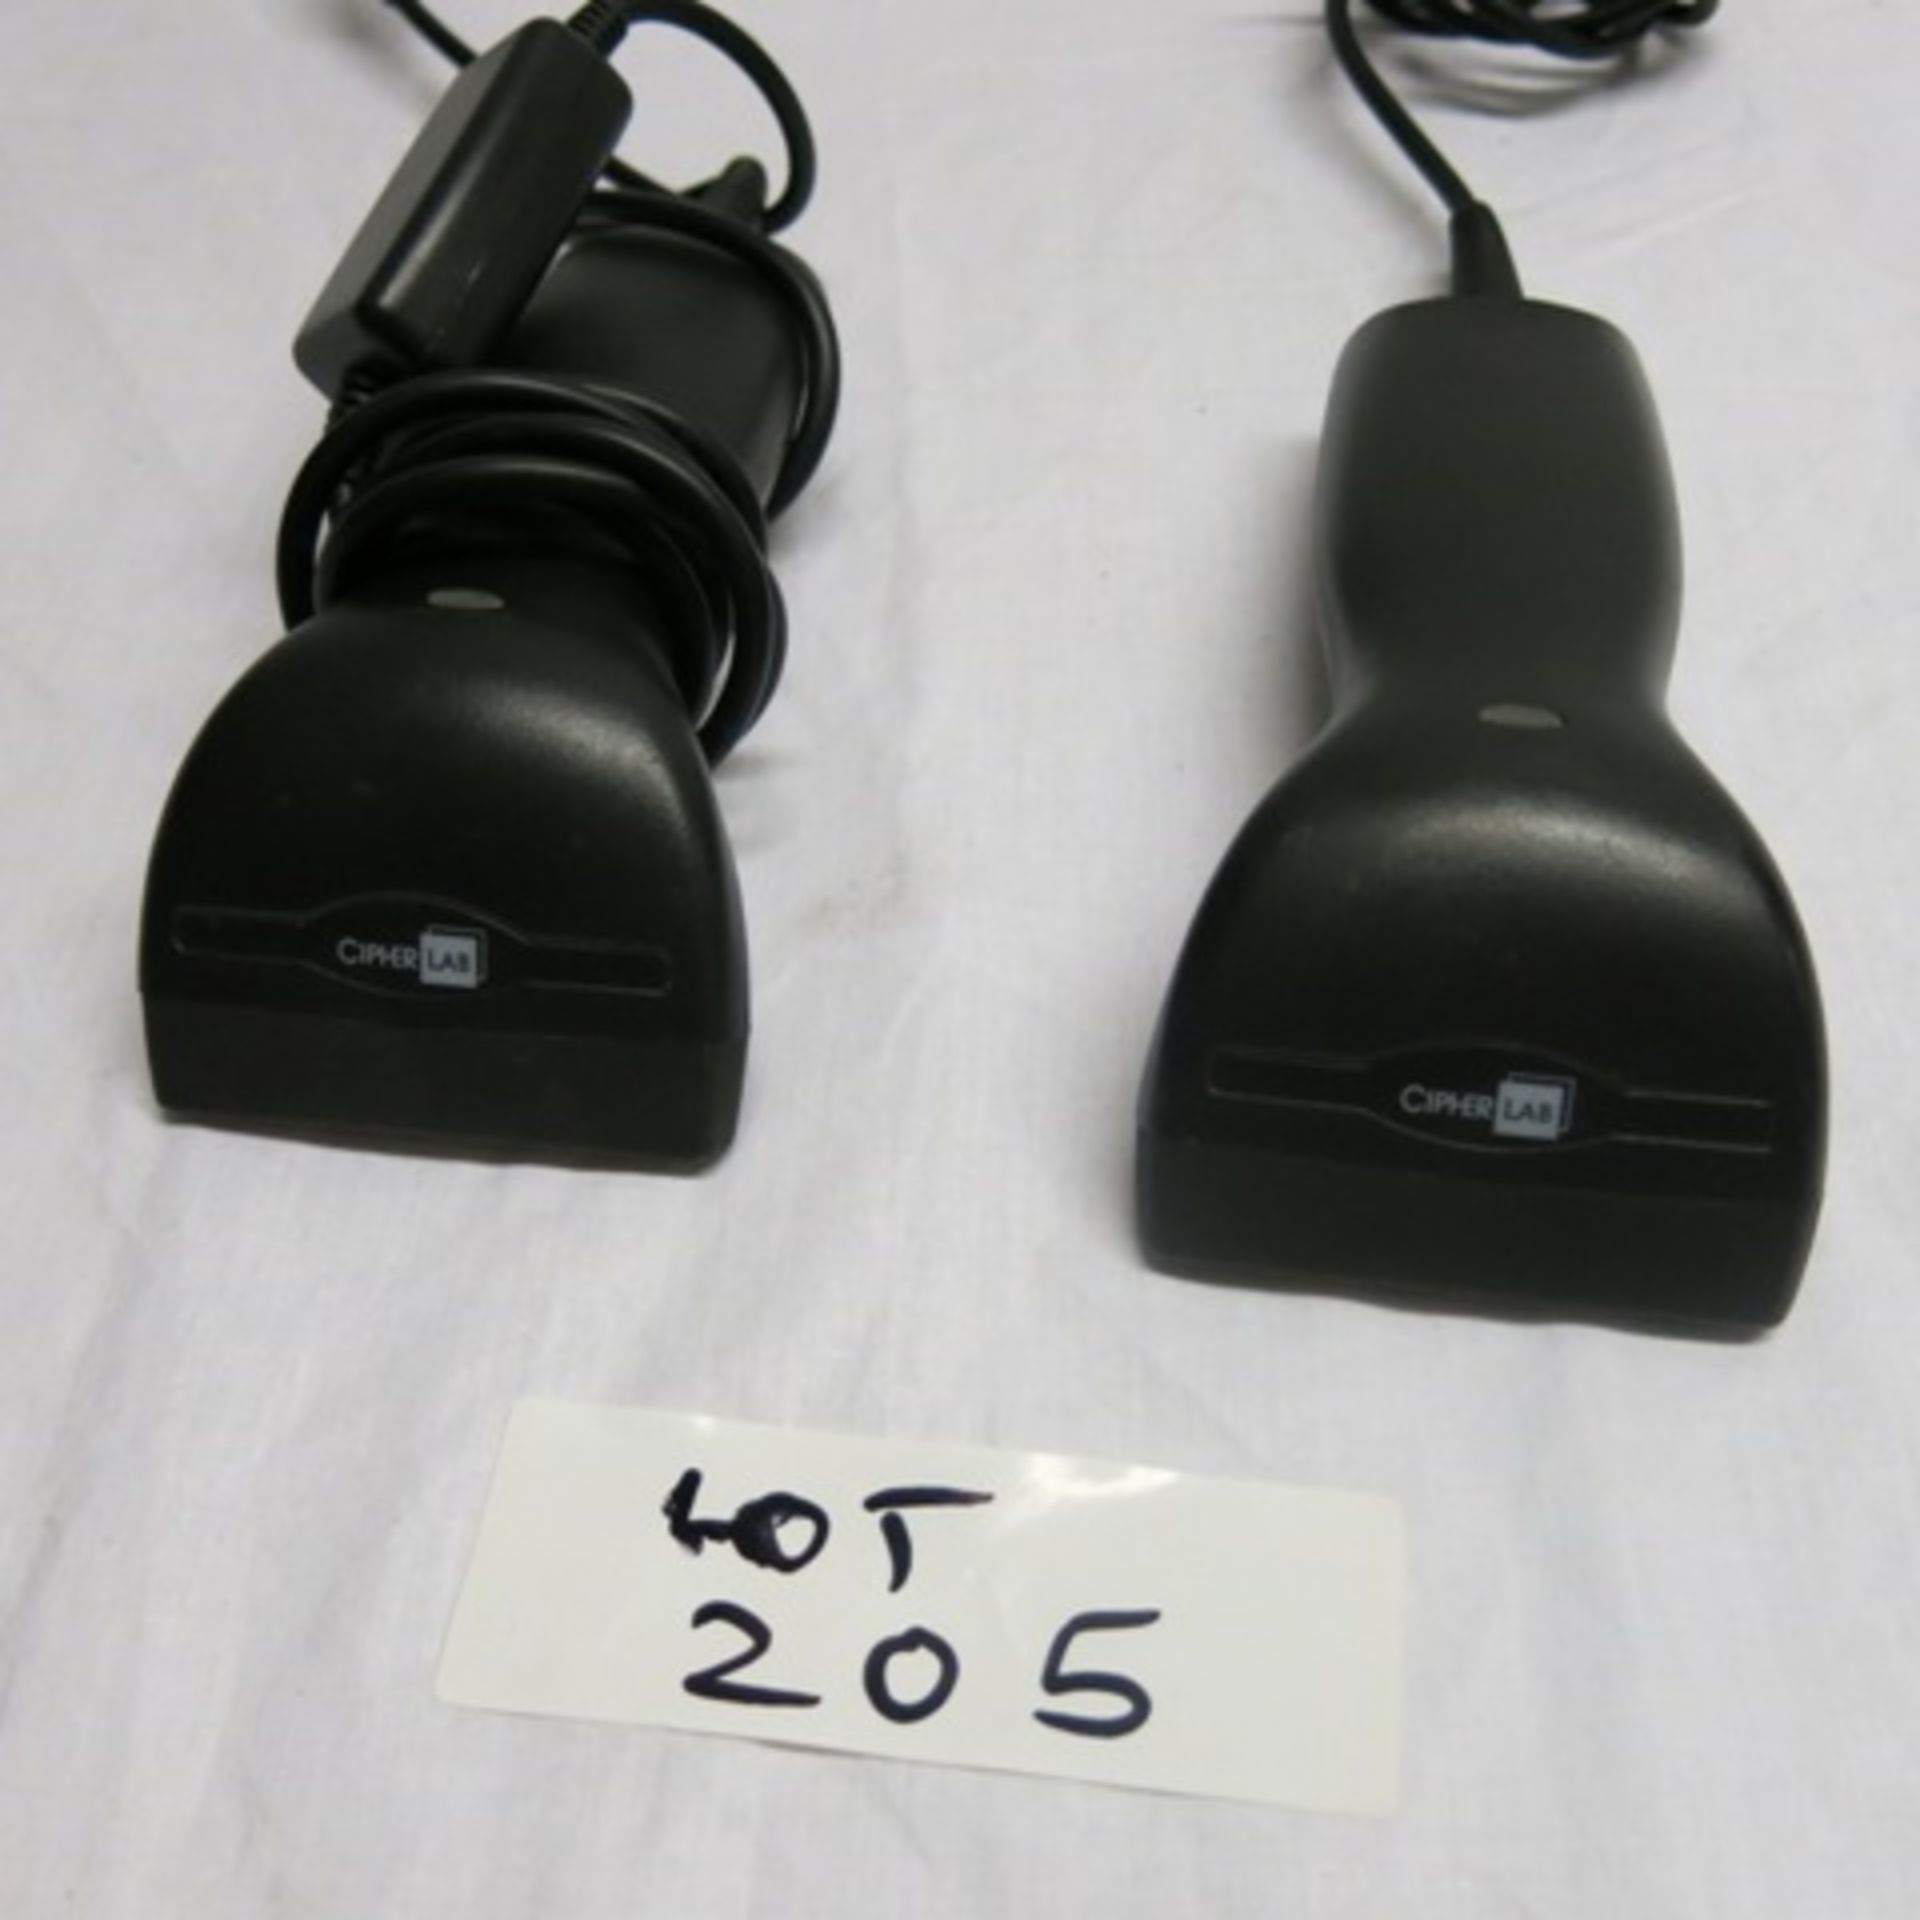 2 x Cipher Lab Barcode Scanners